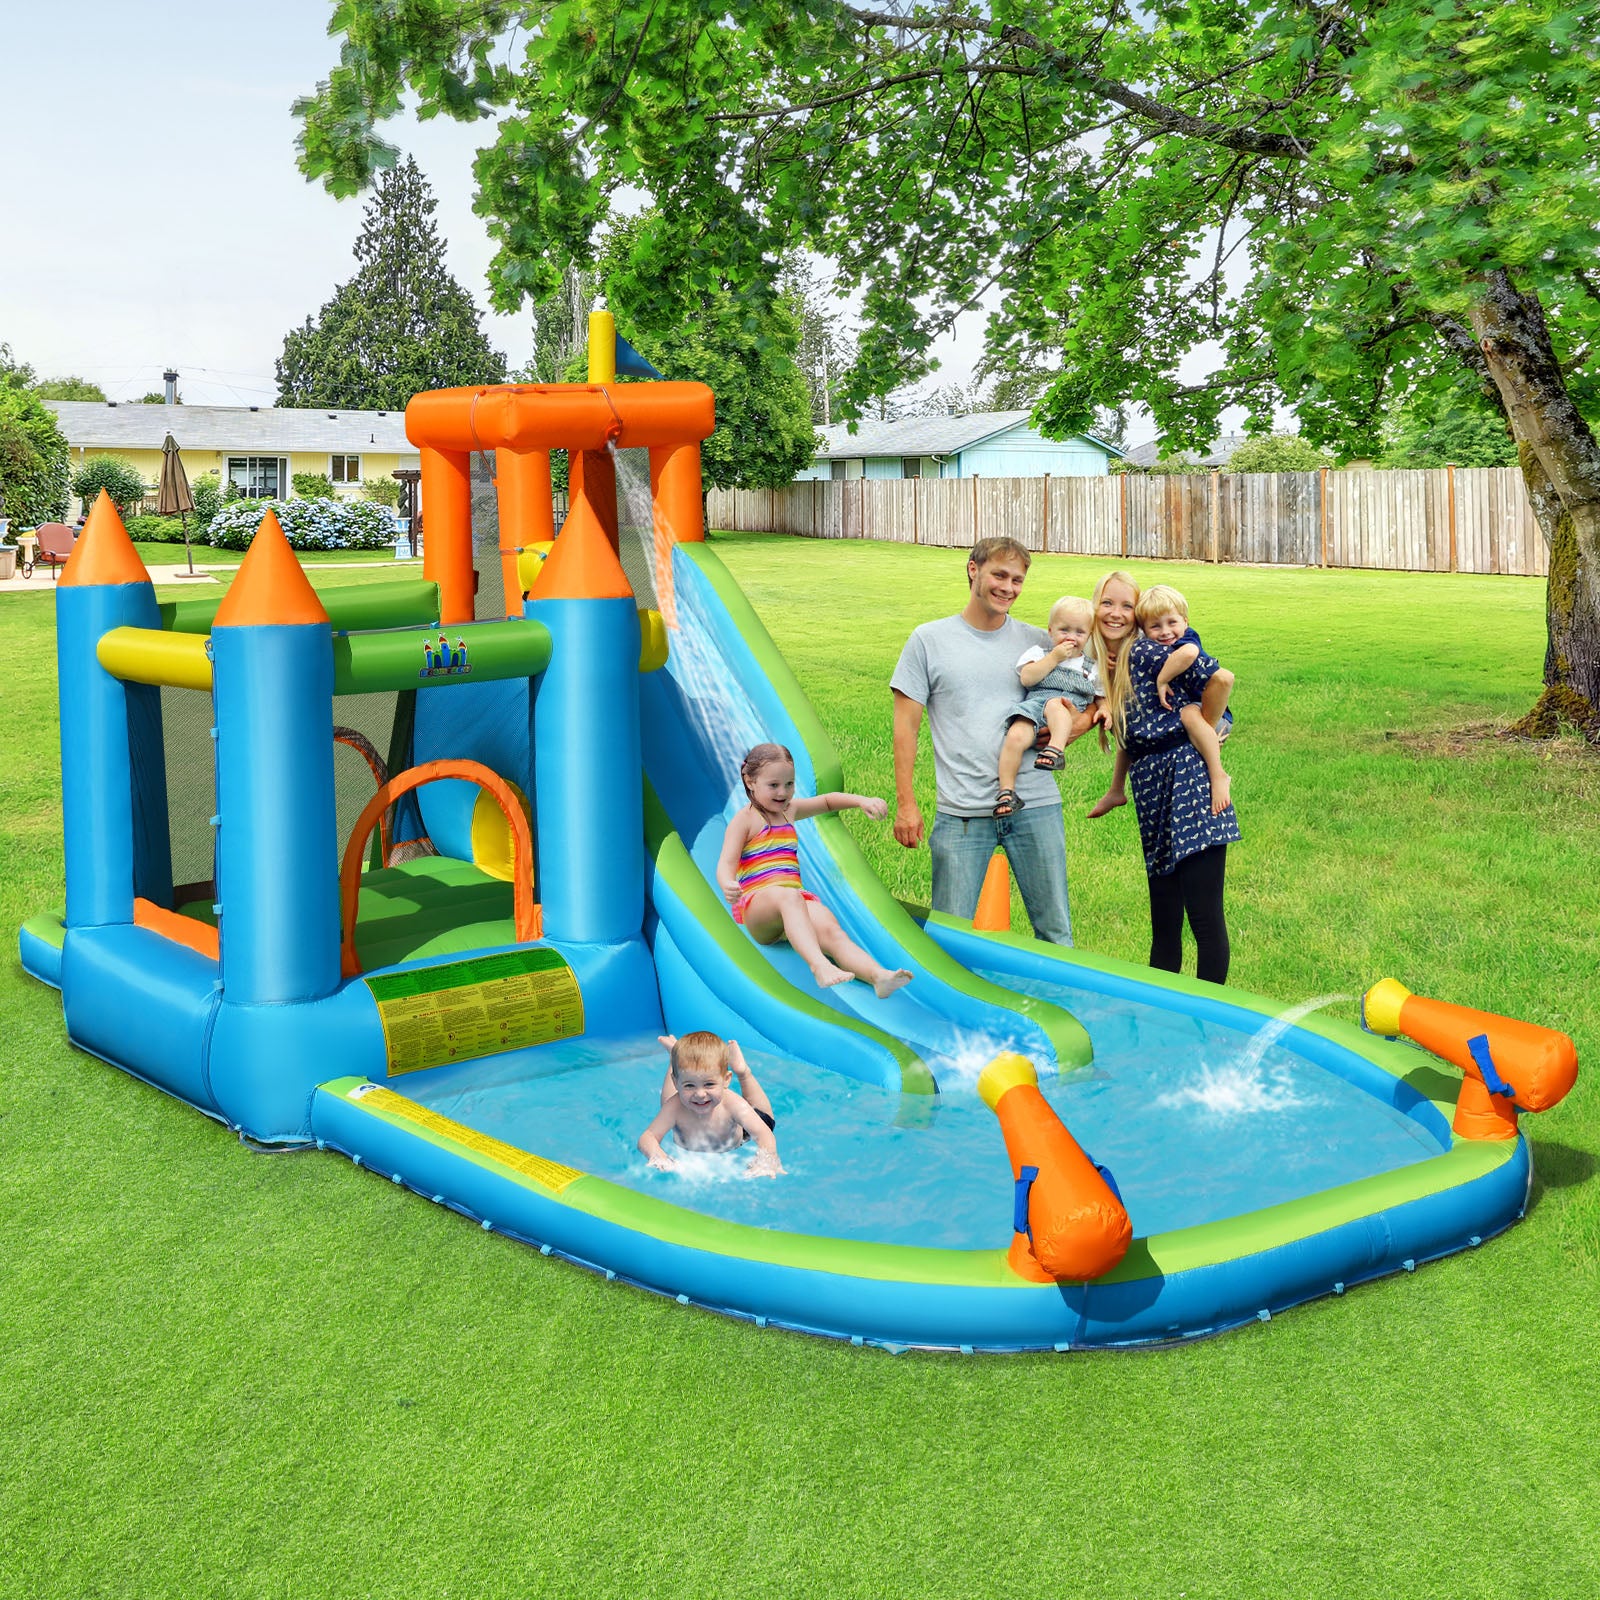 Kids Inflatable Slide Bounce House with Long Slide with Air Blower